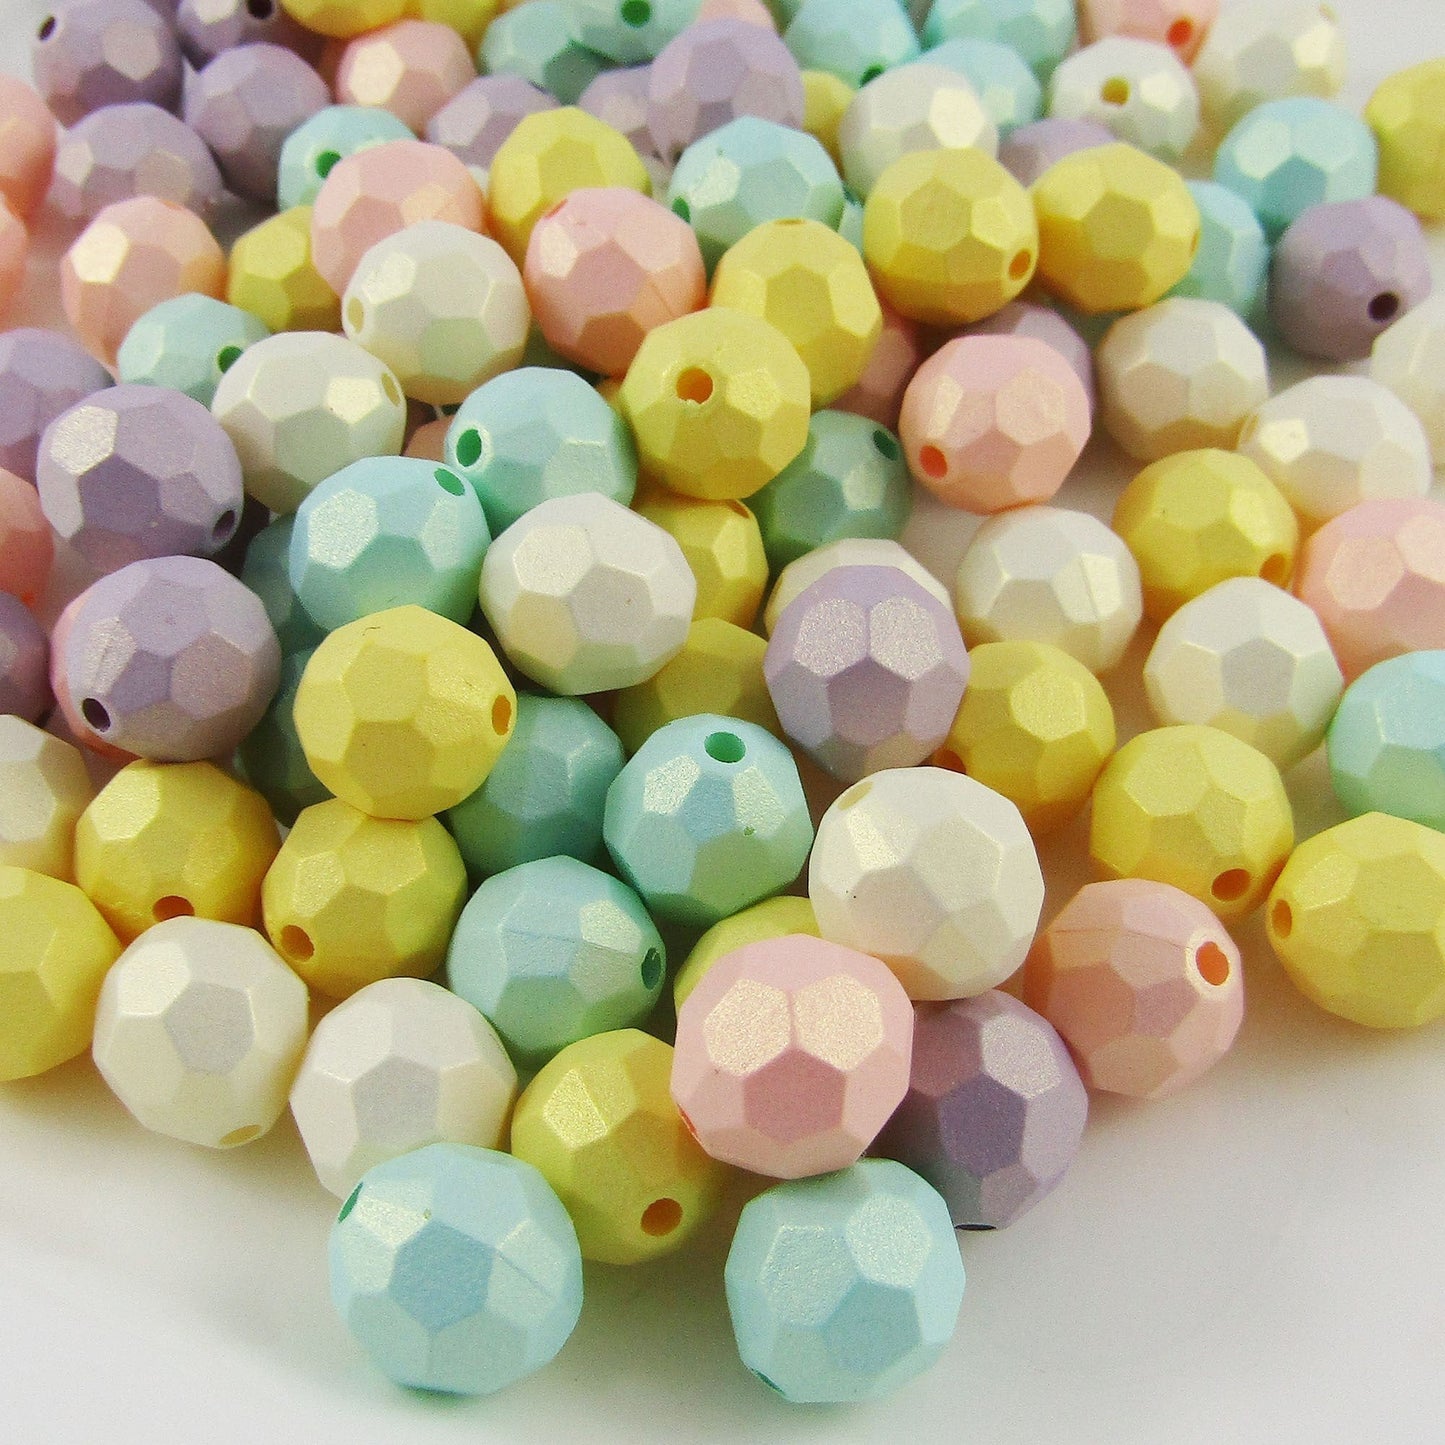 50g 100+pcs Pastel Acrylic Faceted Round Craft Beads 10mm